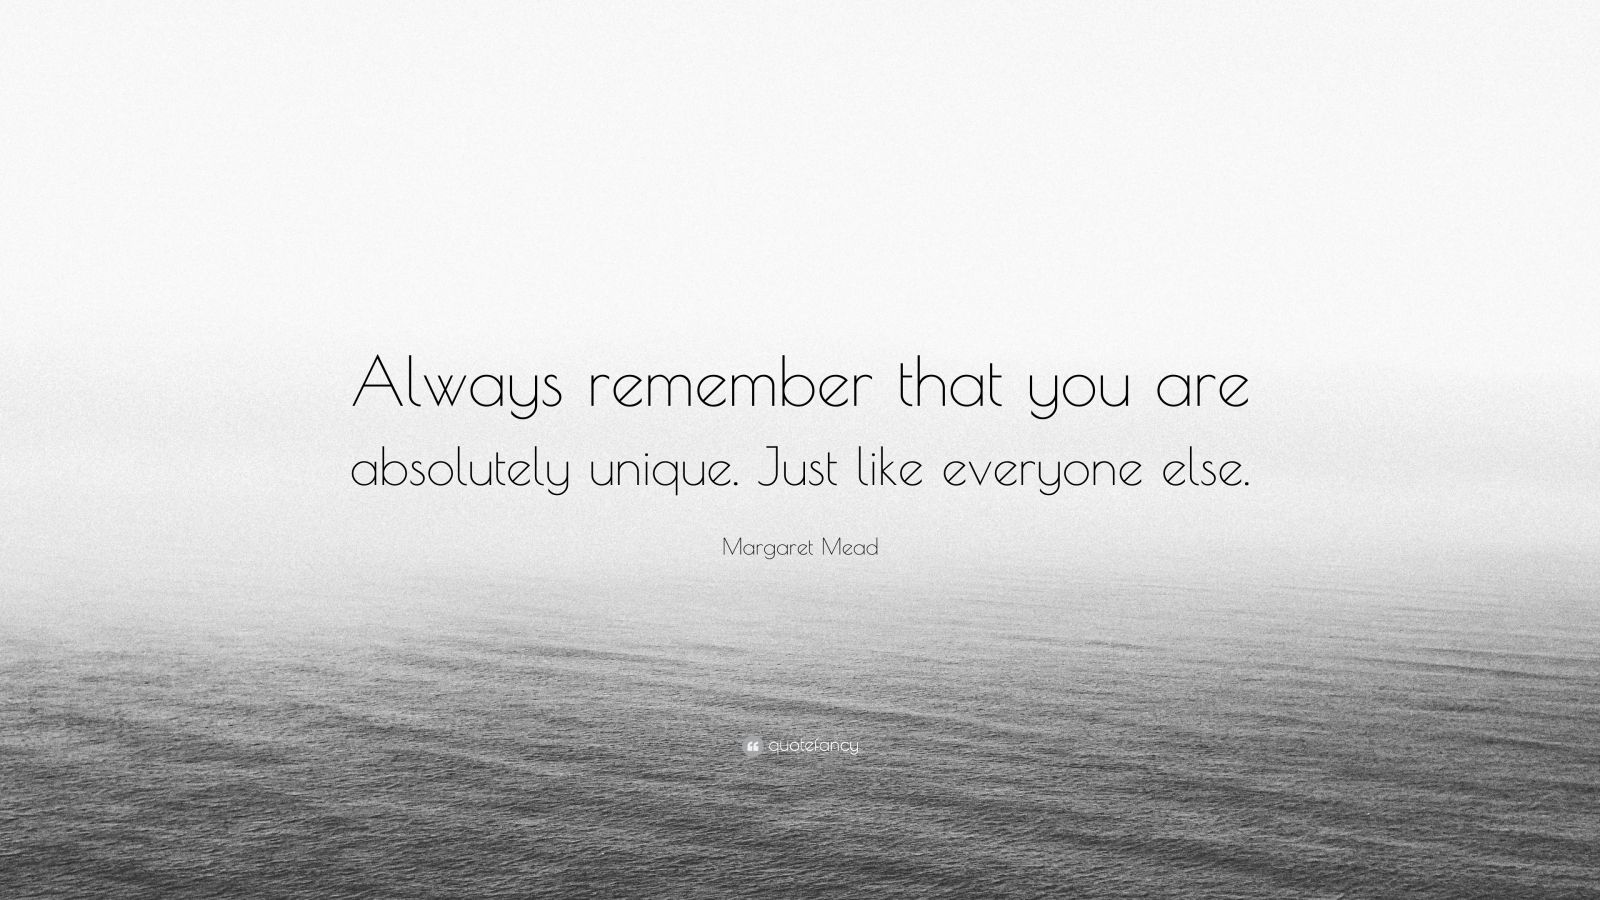 Margaret Mead Quote: “Always remember that you are absolutely unique ...